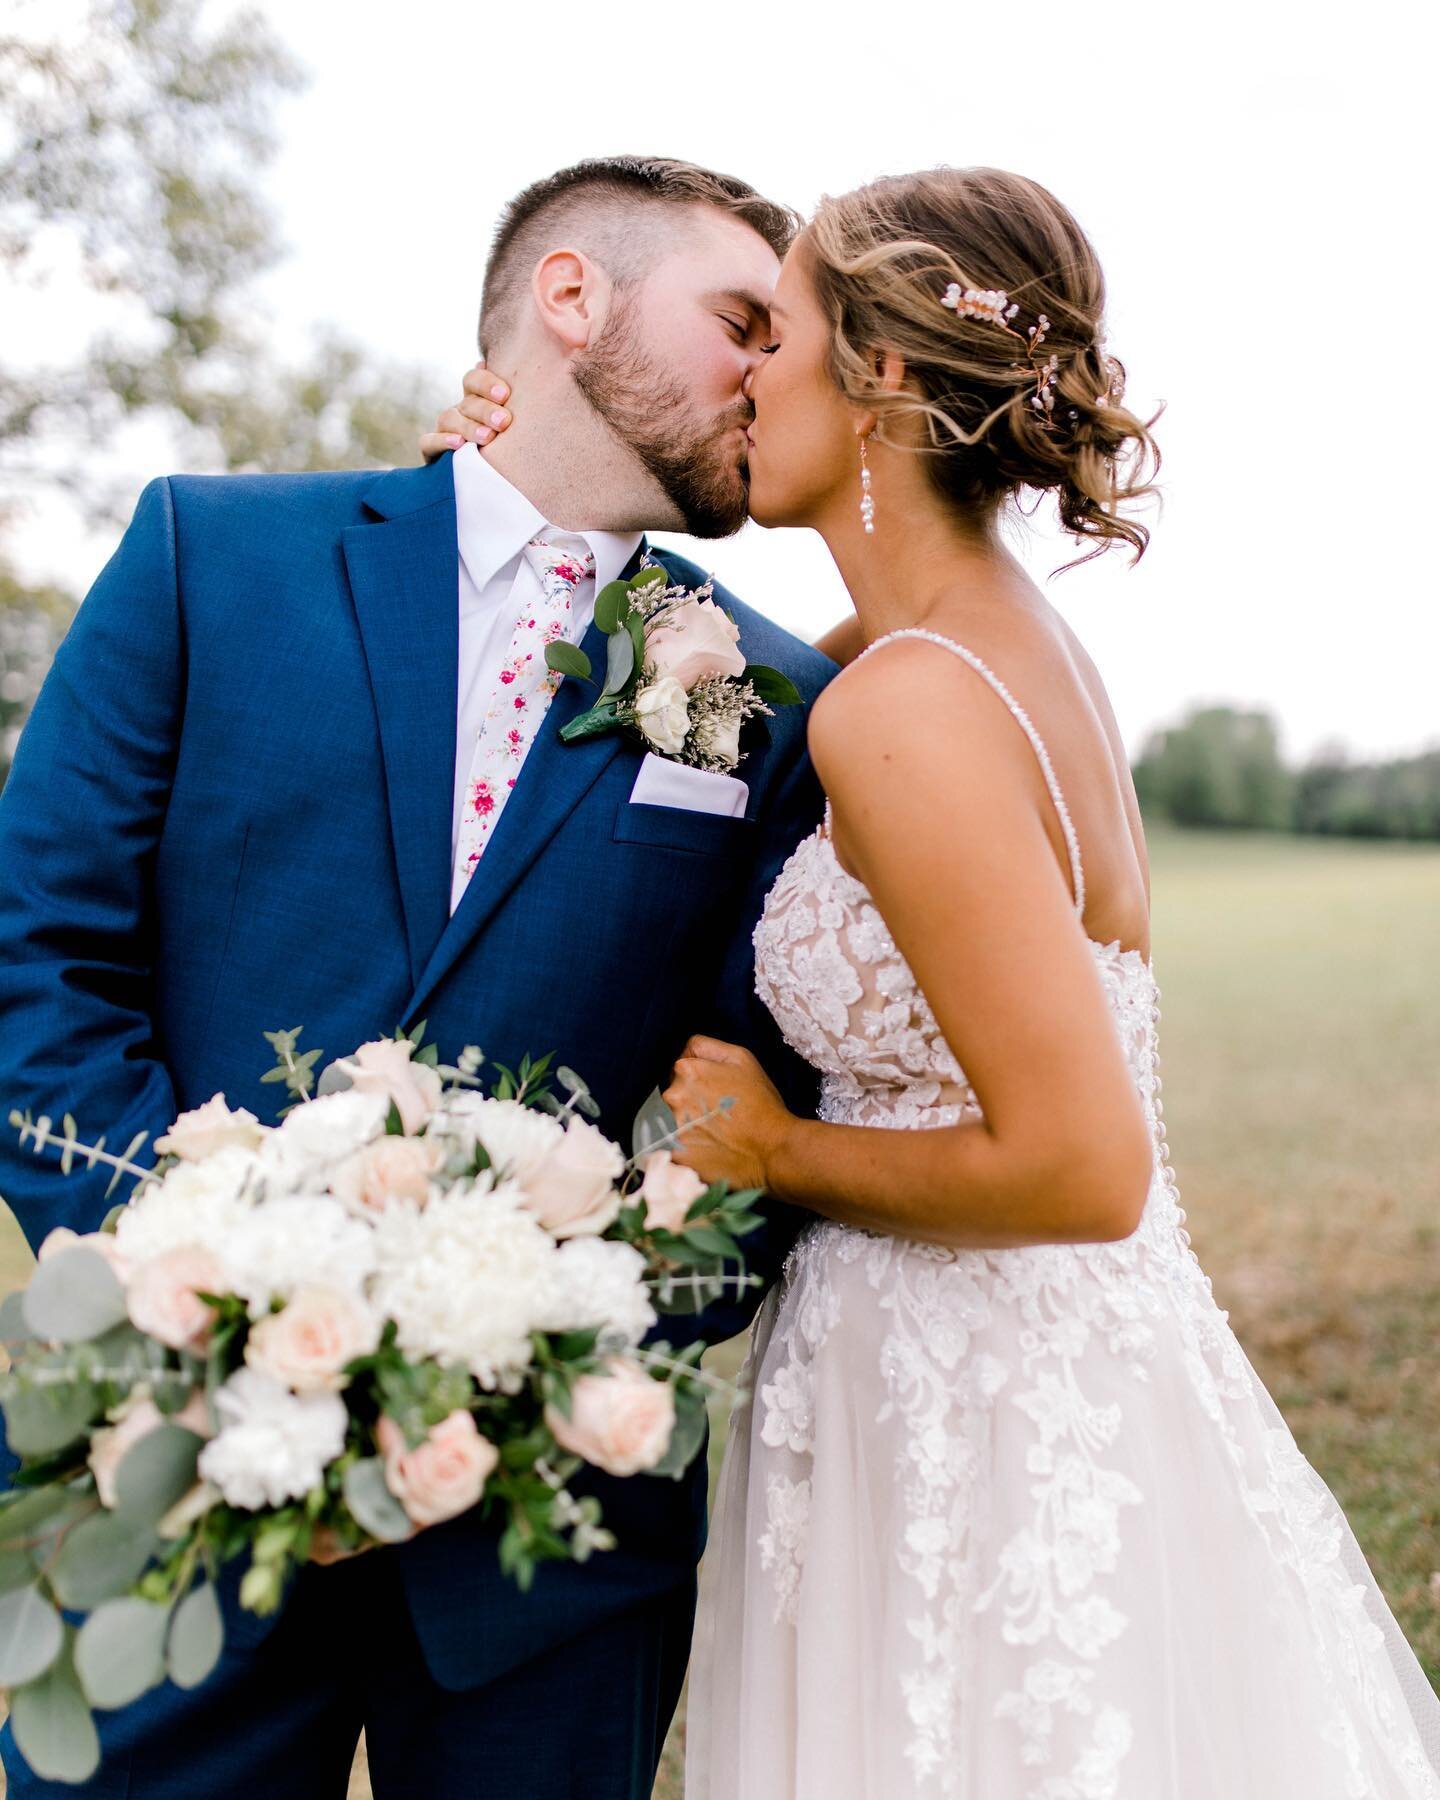 These two 😍 I told Pj to hold onto Bekah&rsquo;s bouquet for a second so that she could squeeze him tight. Contrary to some of the looks I got when those words left my mouth, I think we all loved the result. Thanks for being a true gentleman, Pj!! 
